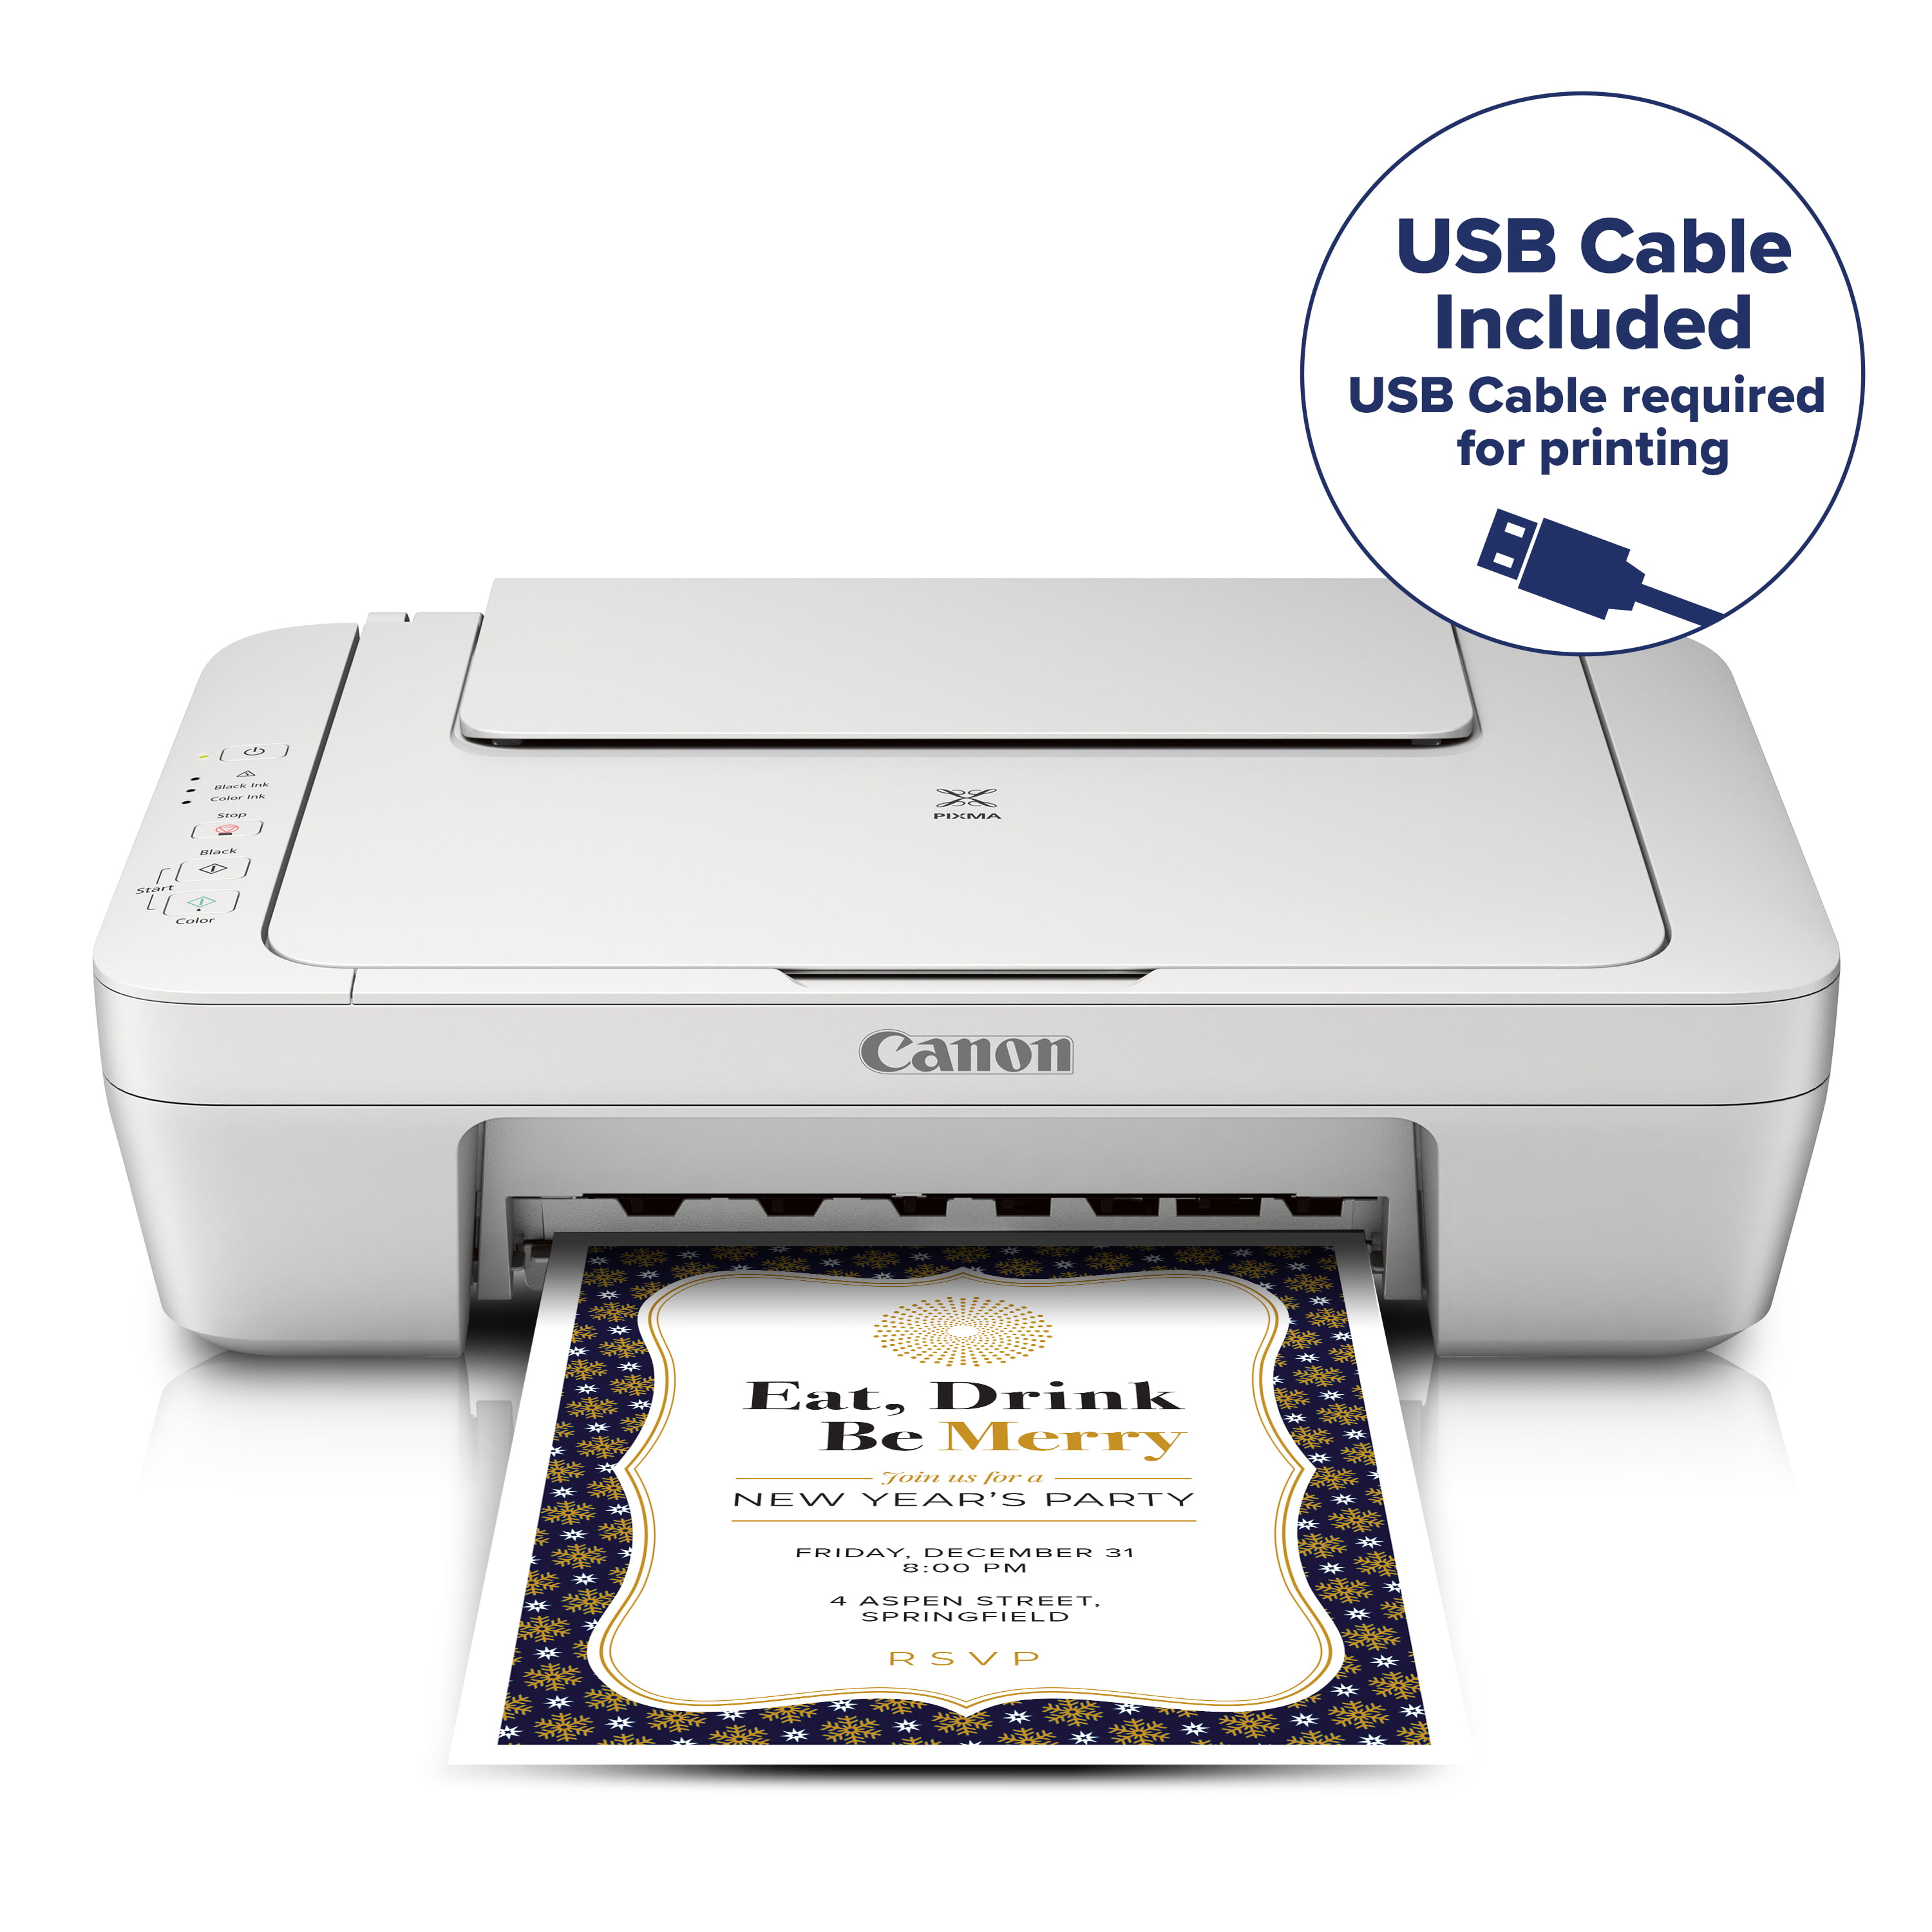 Canon PIXMA MG2522 Wired All-in-One Color Inkjet Printer (White) $39 + Free Shipping